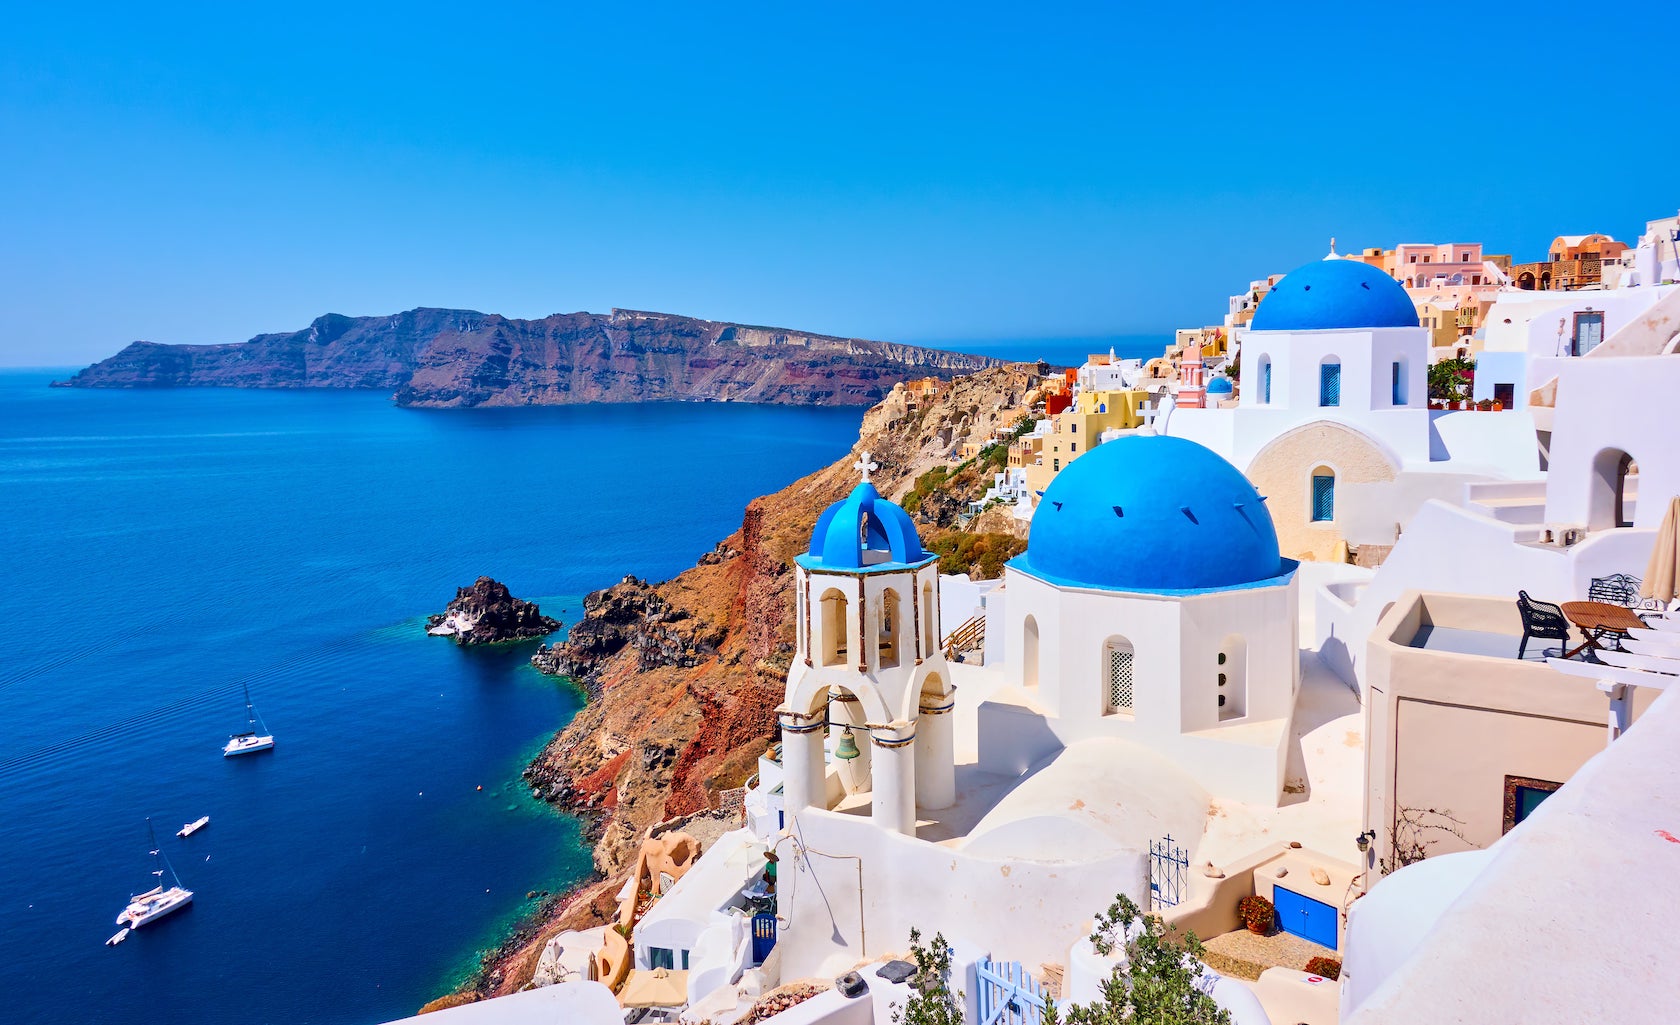 View of the town of Oia on the island of Santorini in Greece - Greek landscape